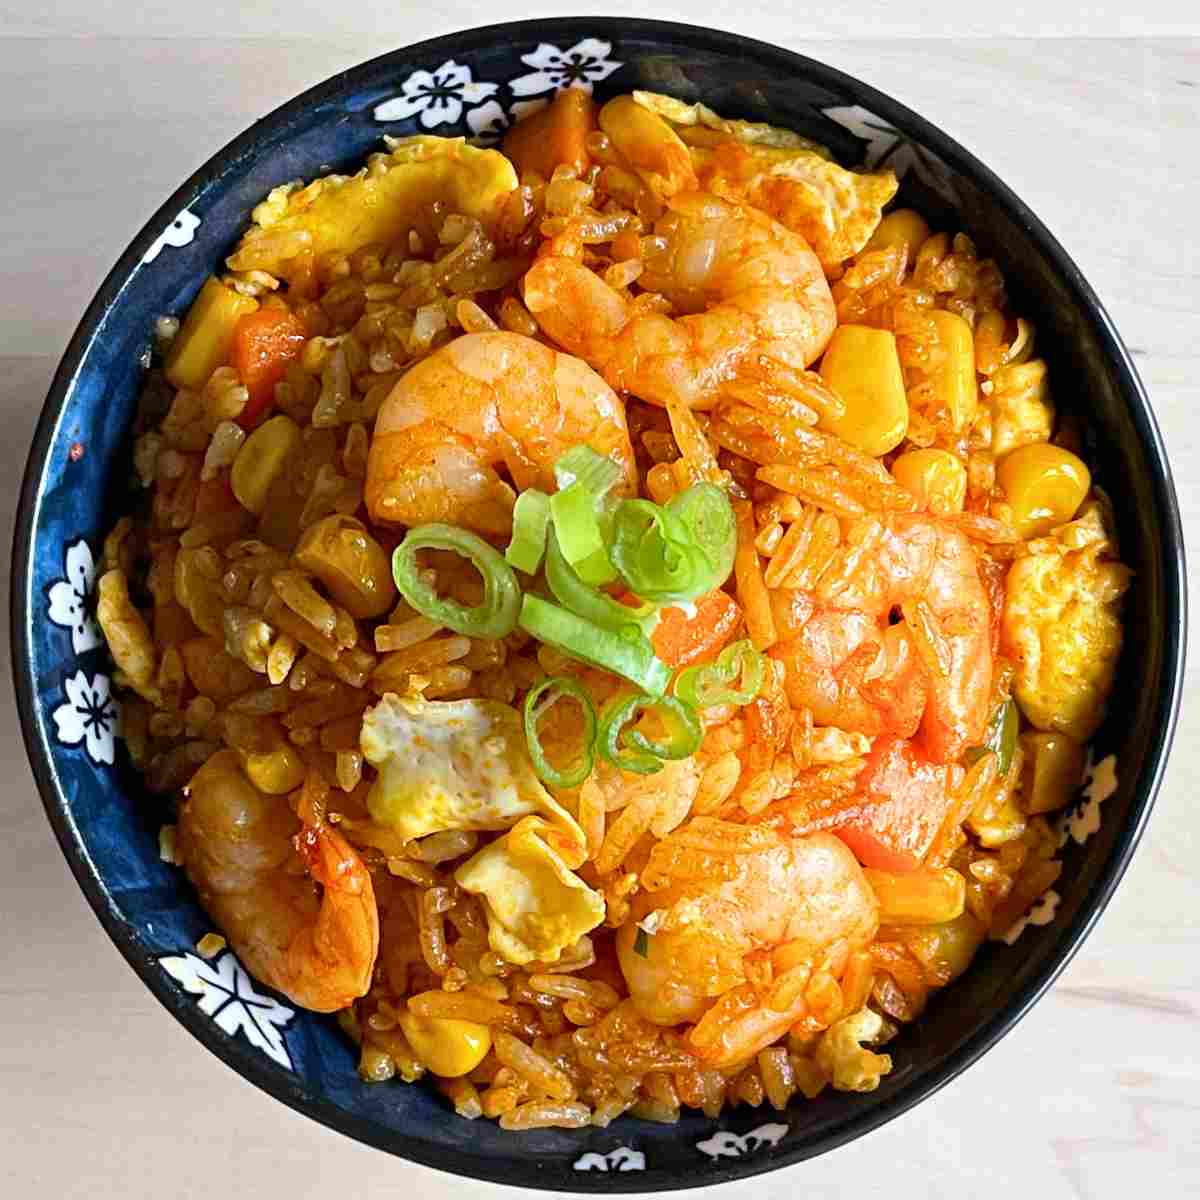 prawn and meat in singapore fried rice